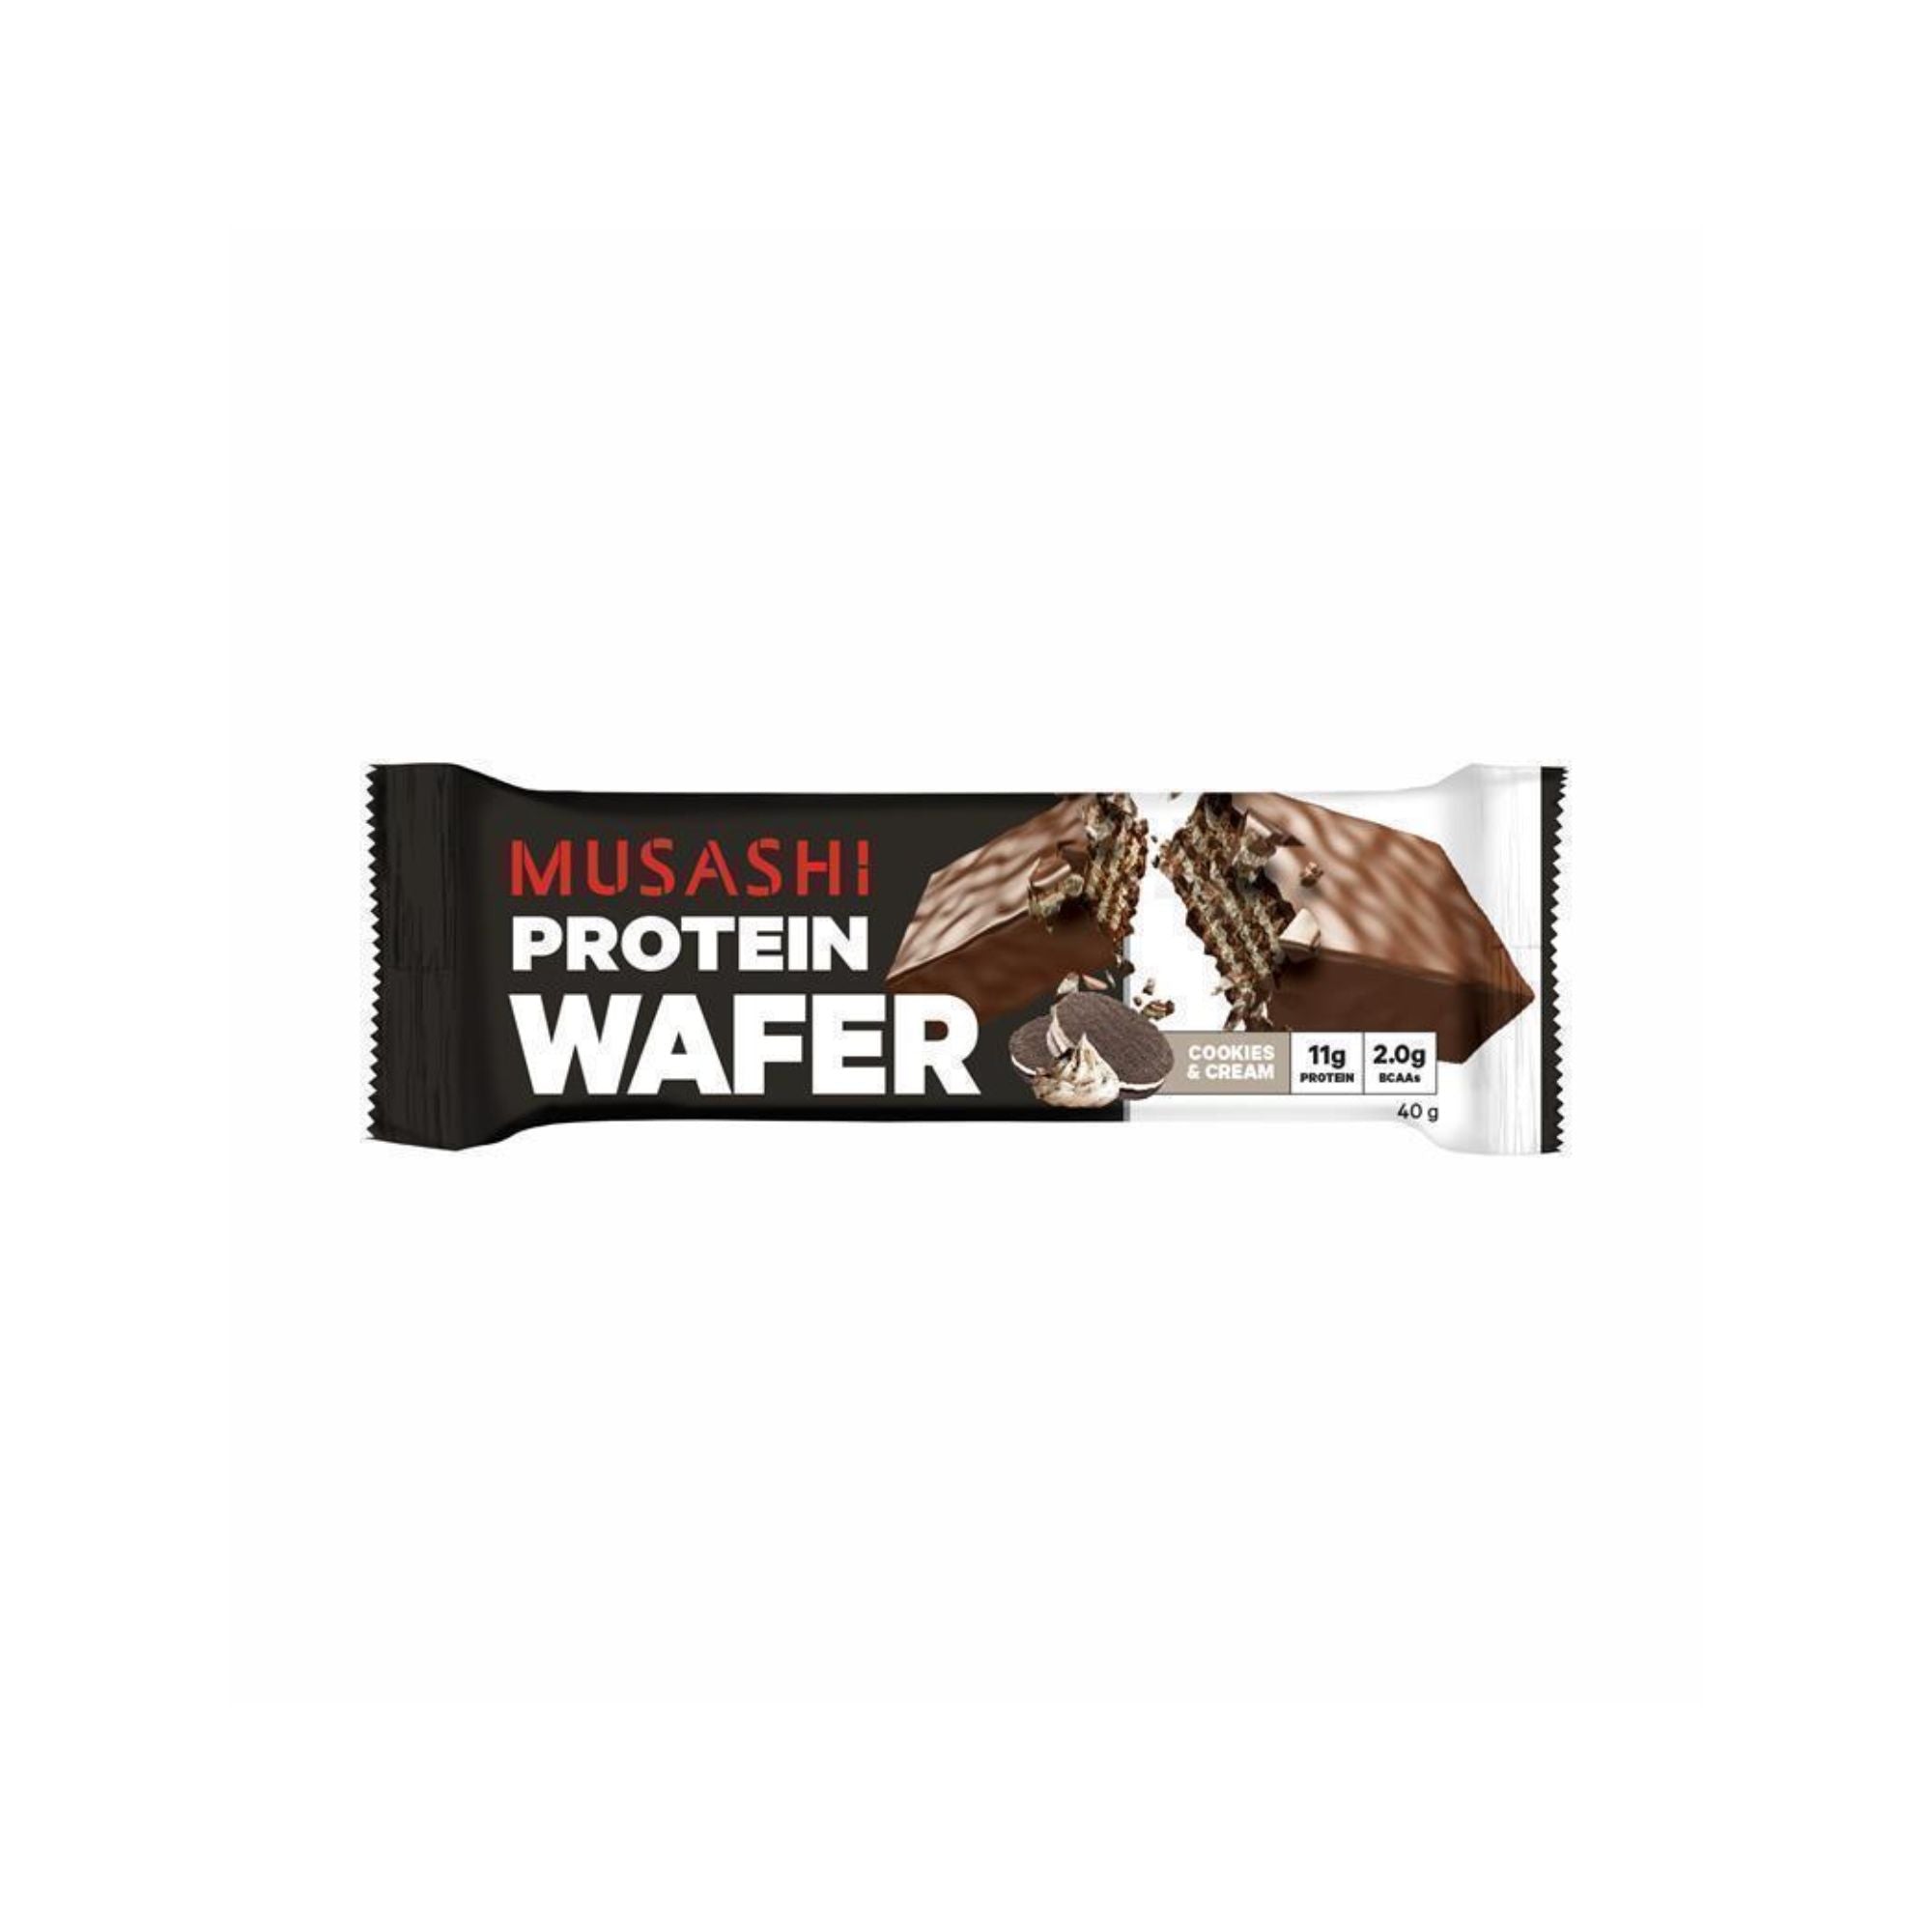 Musashi Protein Wafer Cookies and Cream